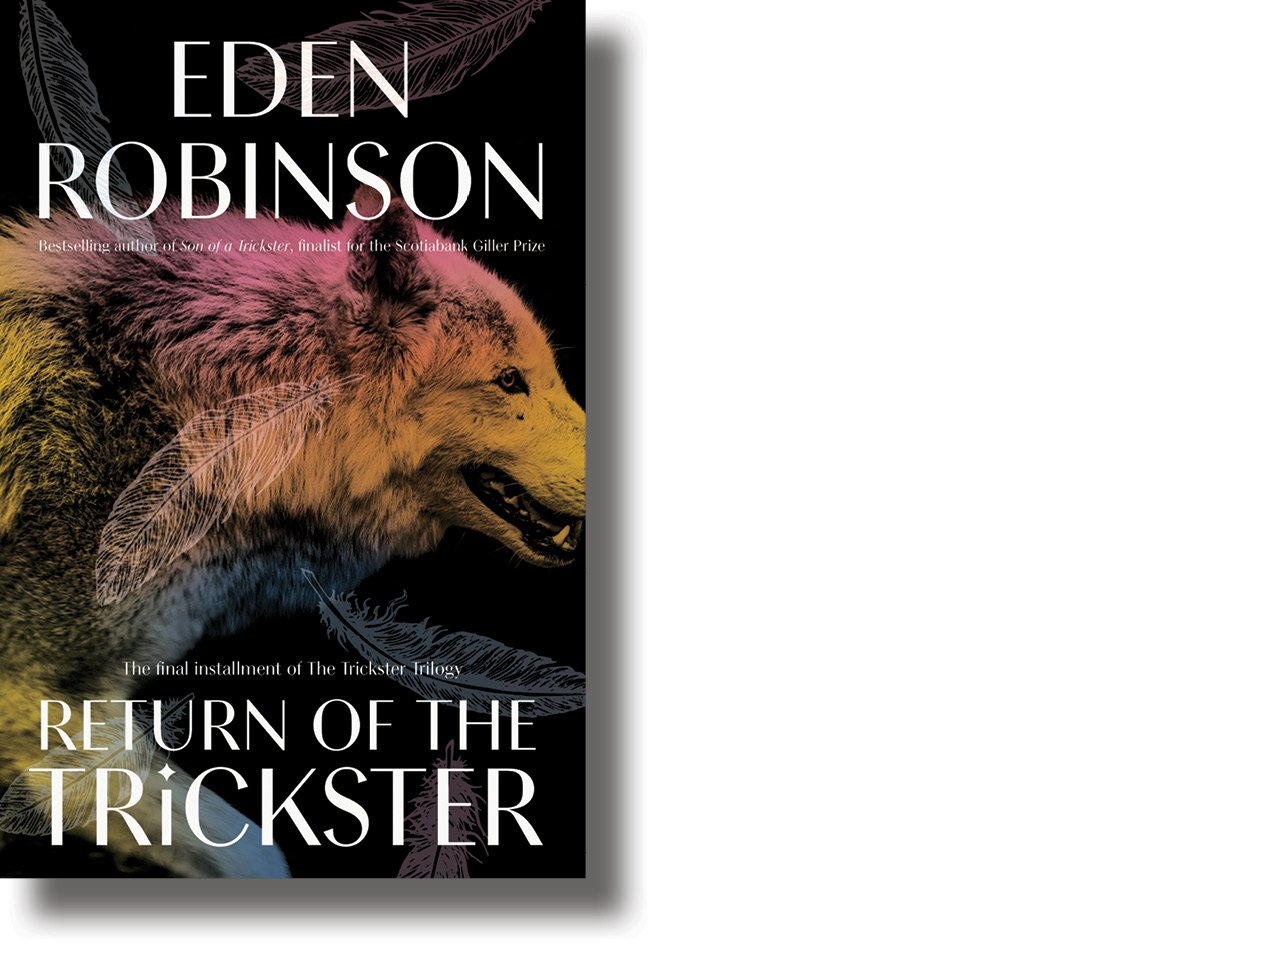 The cover of Return of the Trickster